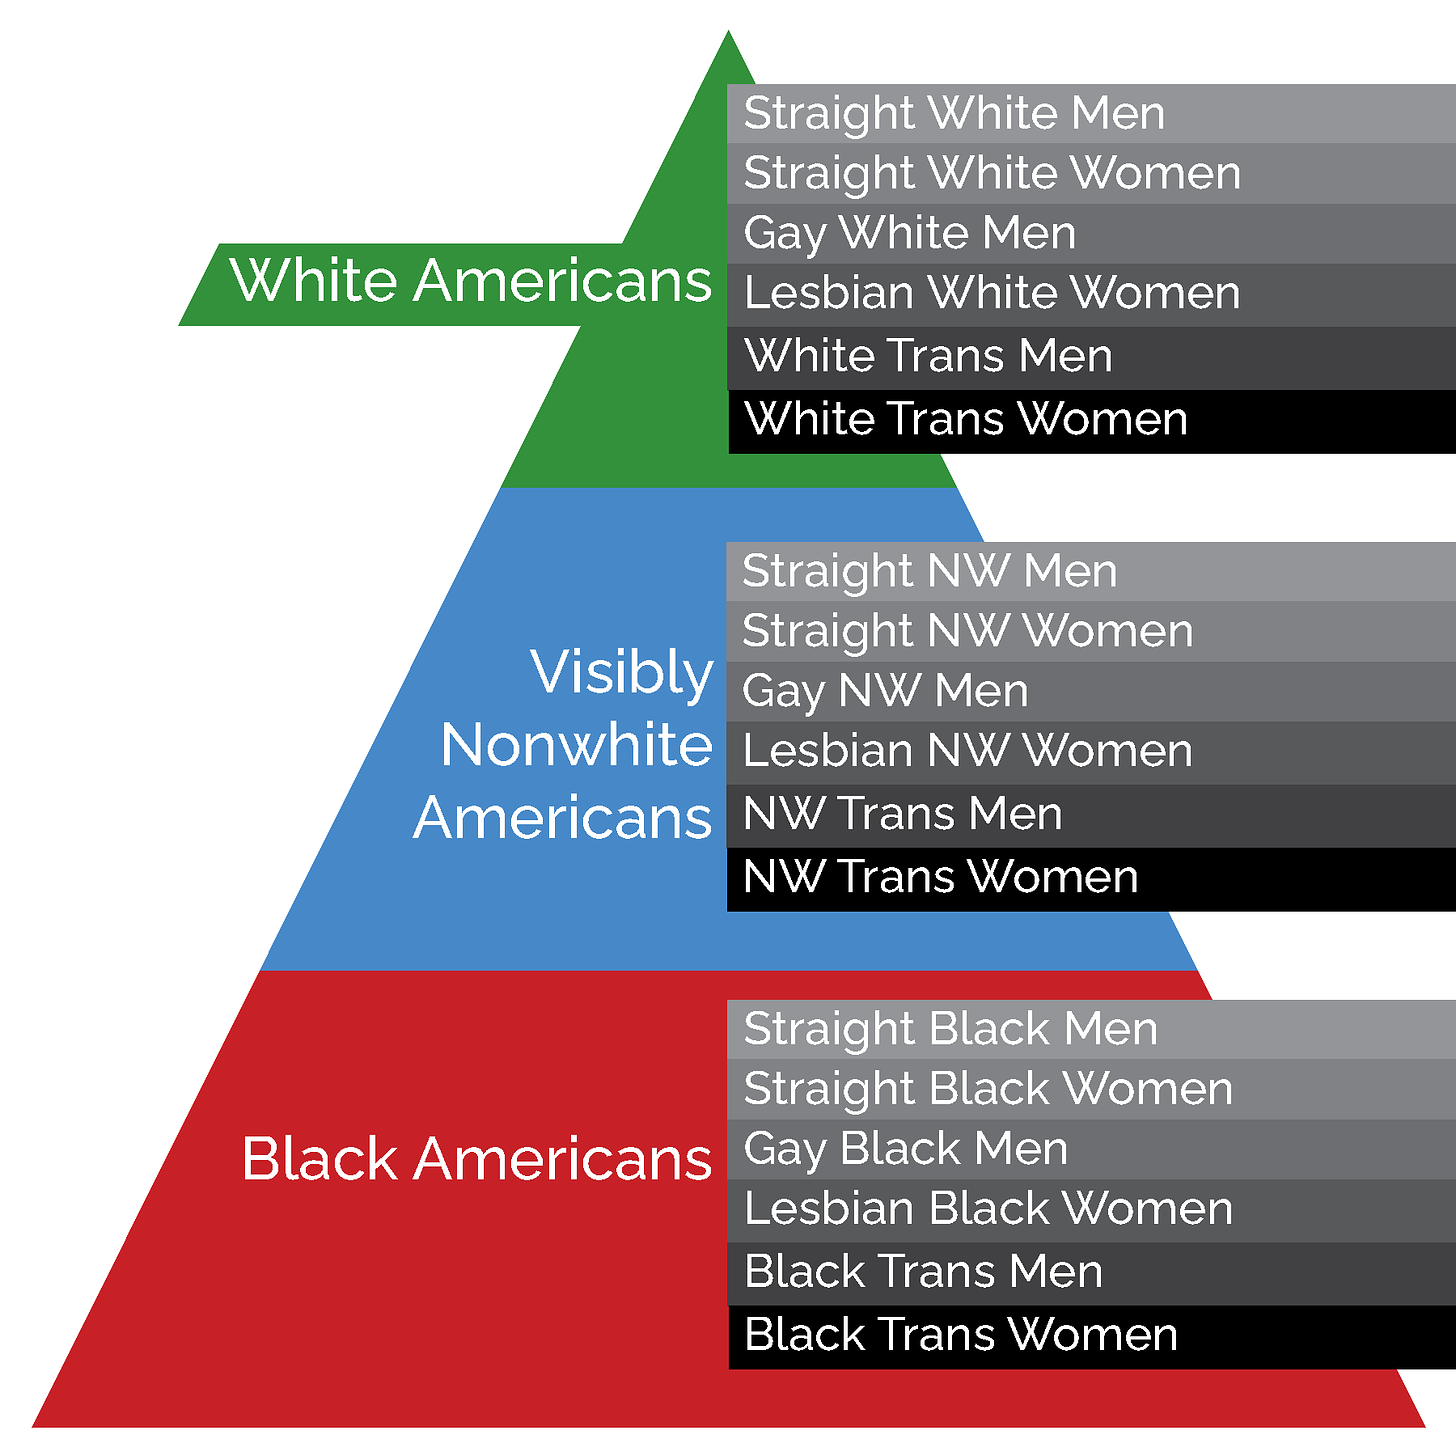 The same caste pyramid as before, but on the right are gradiations of straight to gay to trans people in each layer.